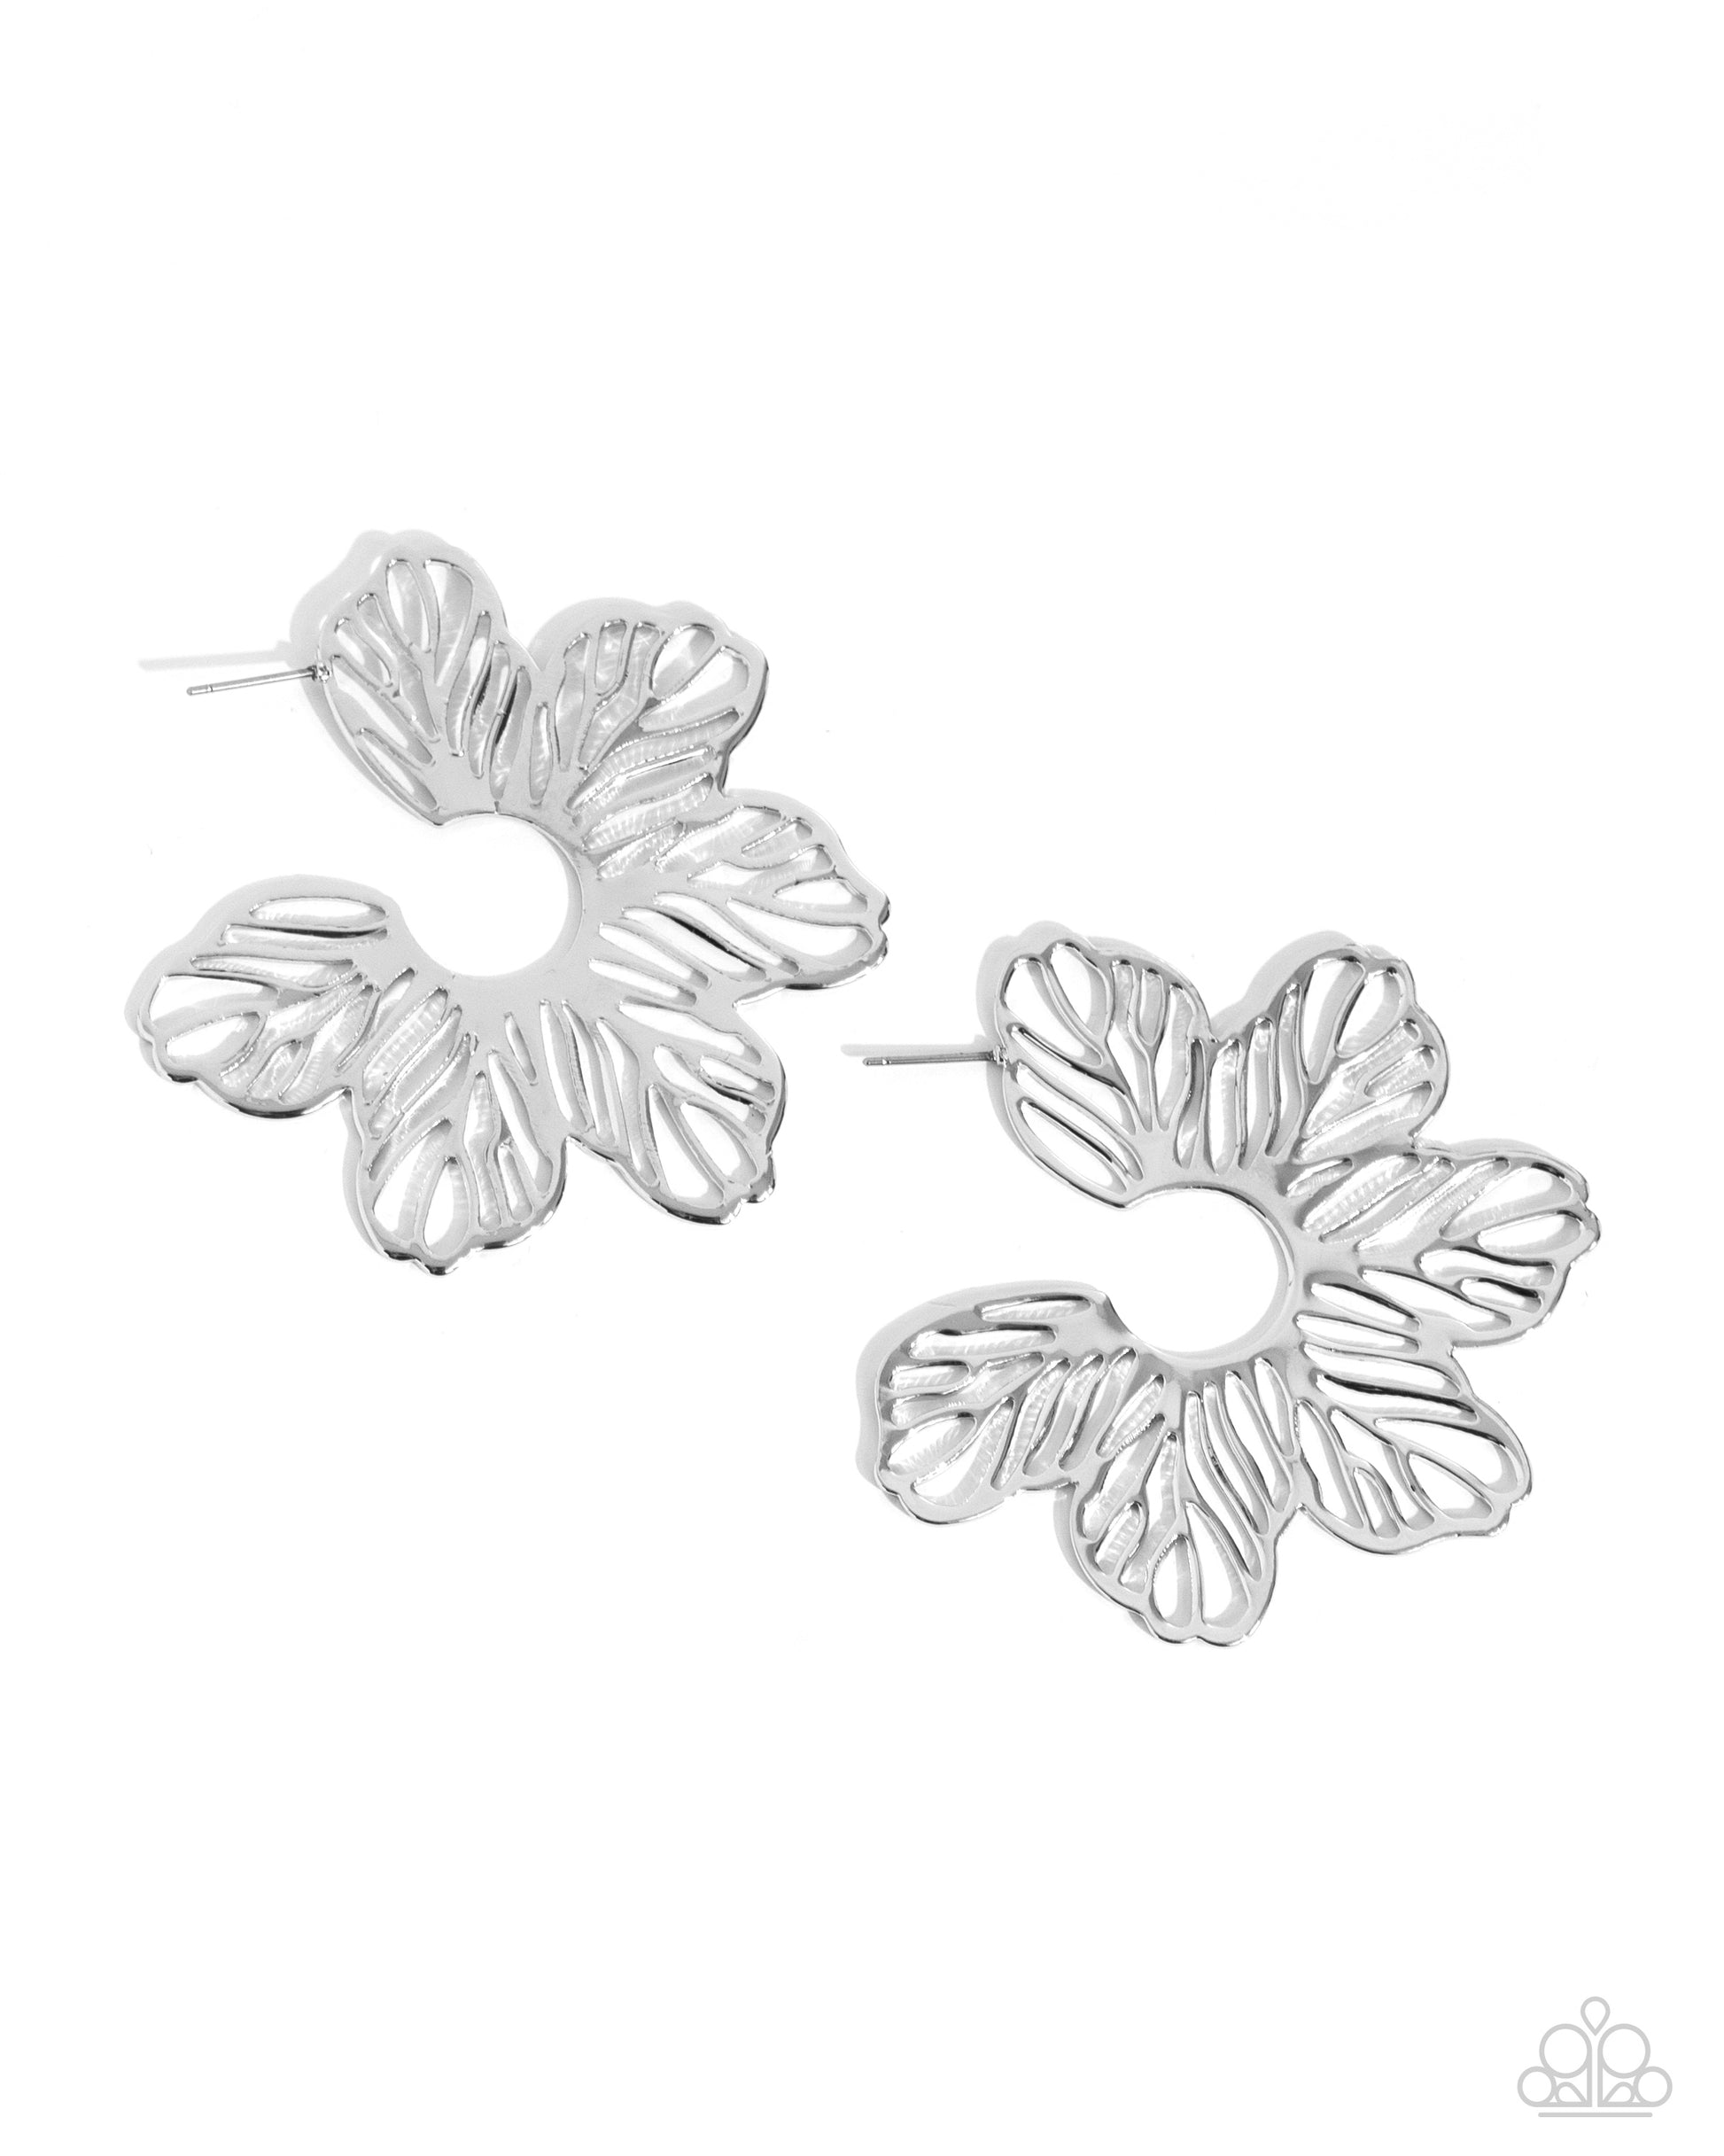 Floral Fame - silver - Paparazzi earrings